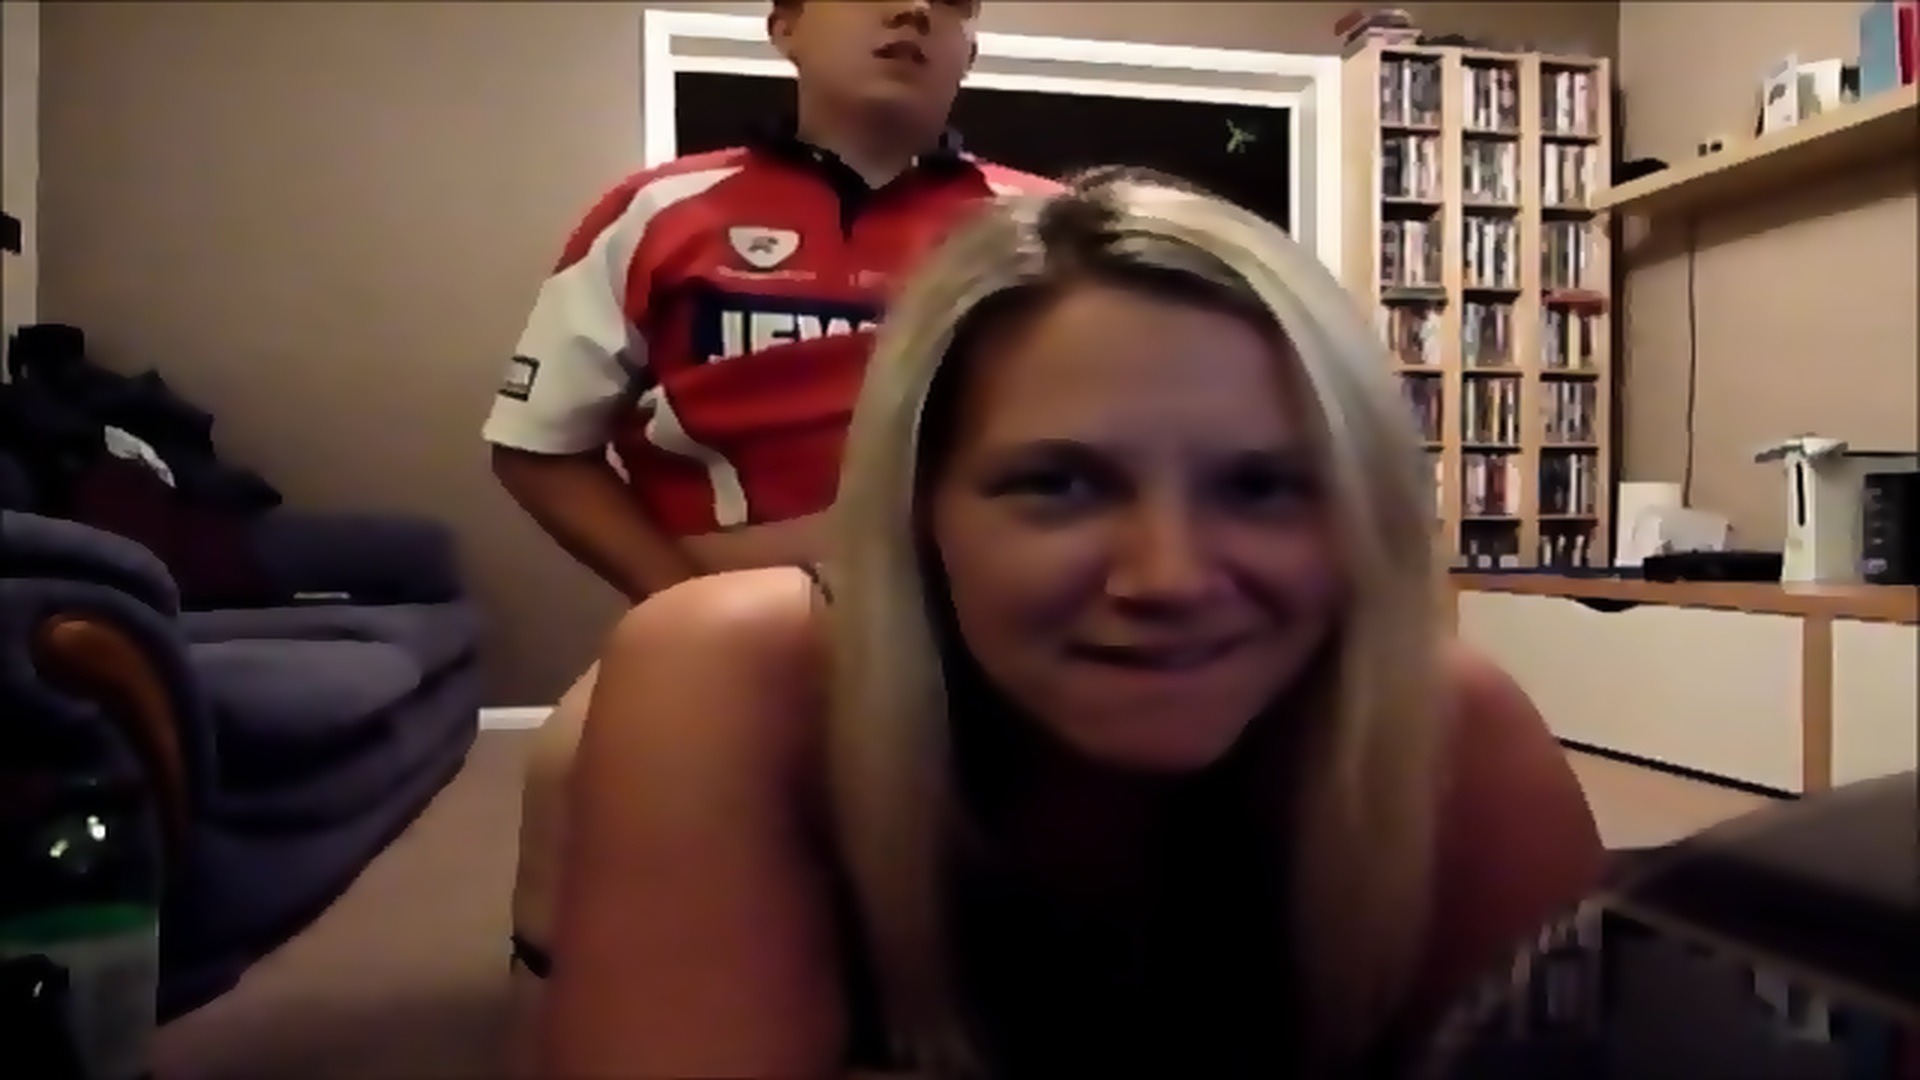 Rachel UK Dogging Hotwife Lets Young Lad Have A Go pic